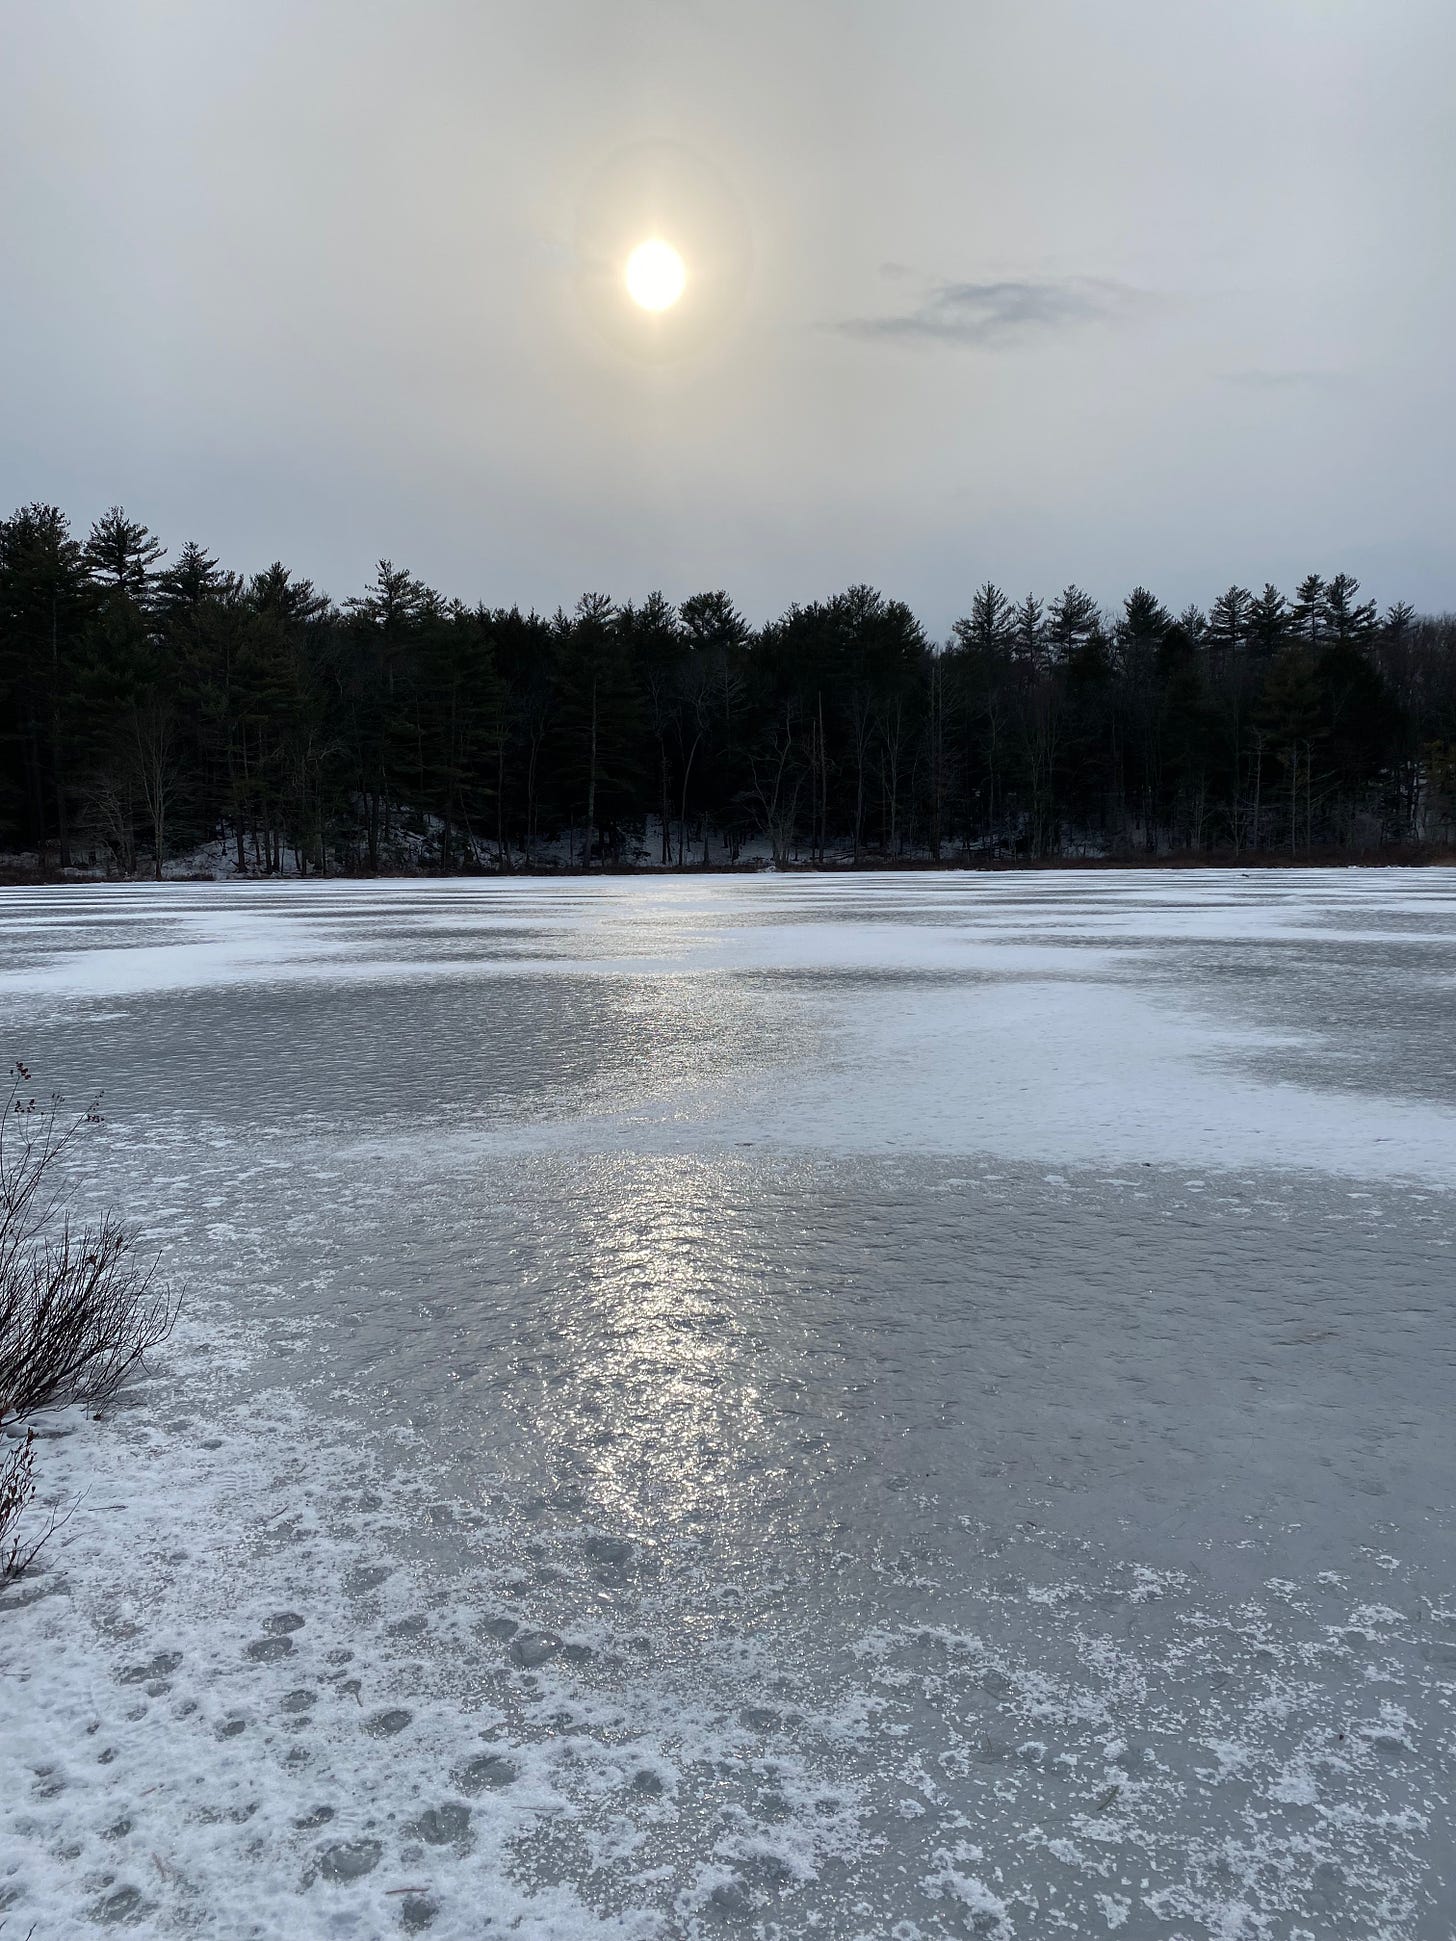 A pale golden sun shining above an ice-covered pond. The sky is sleet gray and cloudy. The sun leaves a shimmery trail across the pond, which is silver with ice, and covered in small white snowdrifts. There is a line of dark evergreen trees along the pond’s far bank.